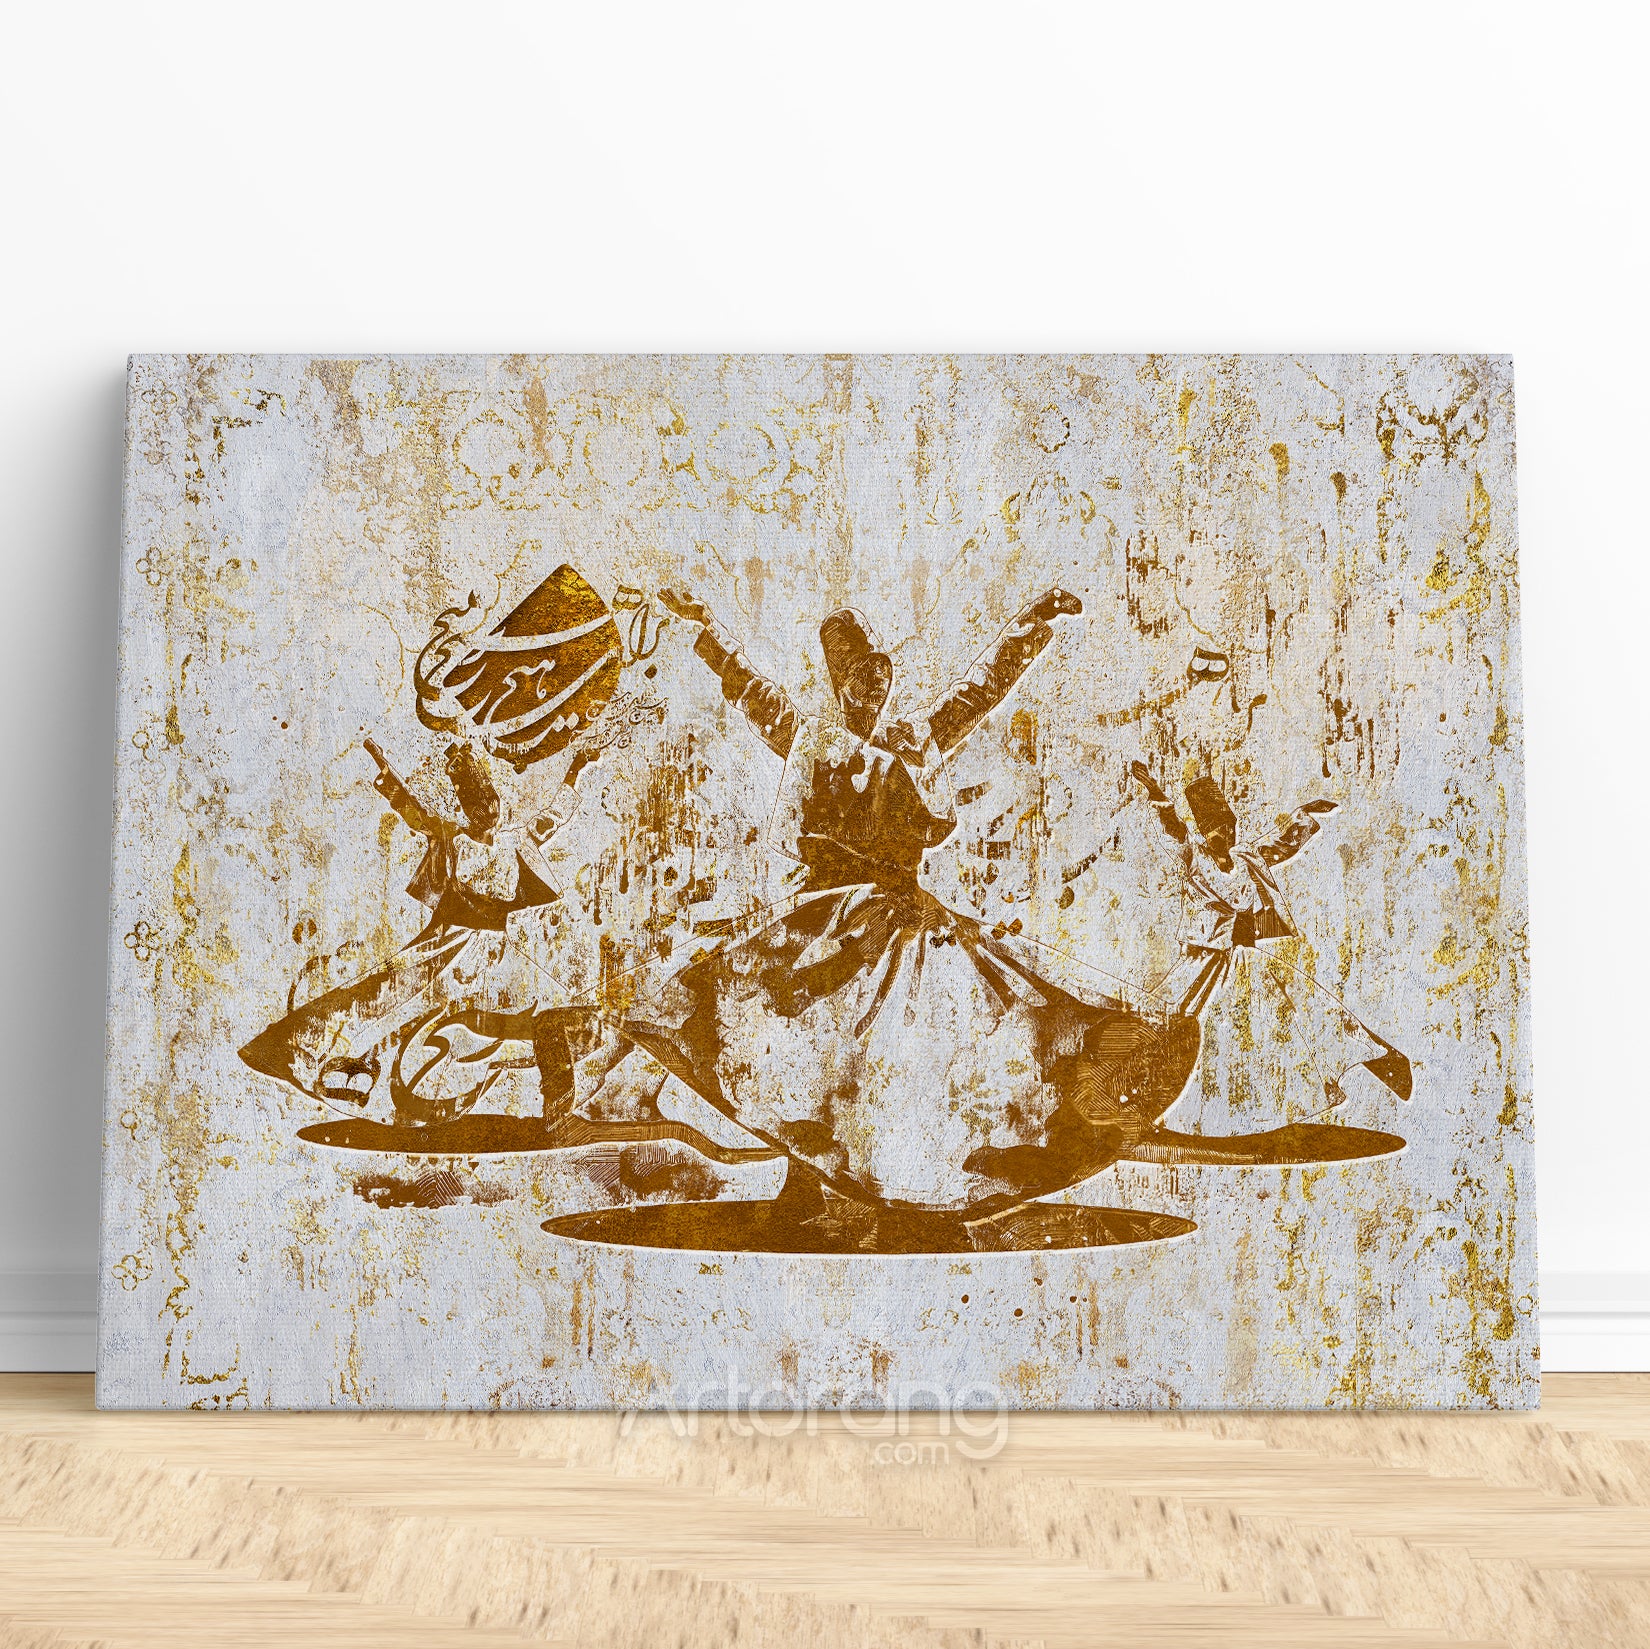 Whirling dervishes with Rumi quote canvas print wall art, Sufi dance, Turkish art, Rumi Poetry Large Wall Art